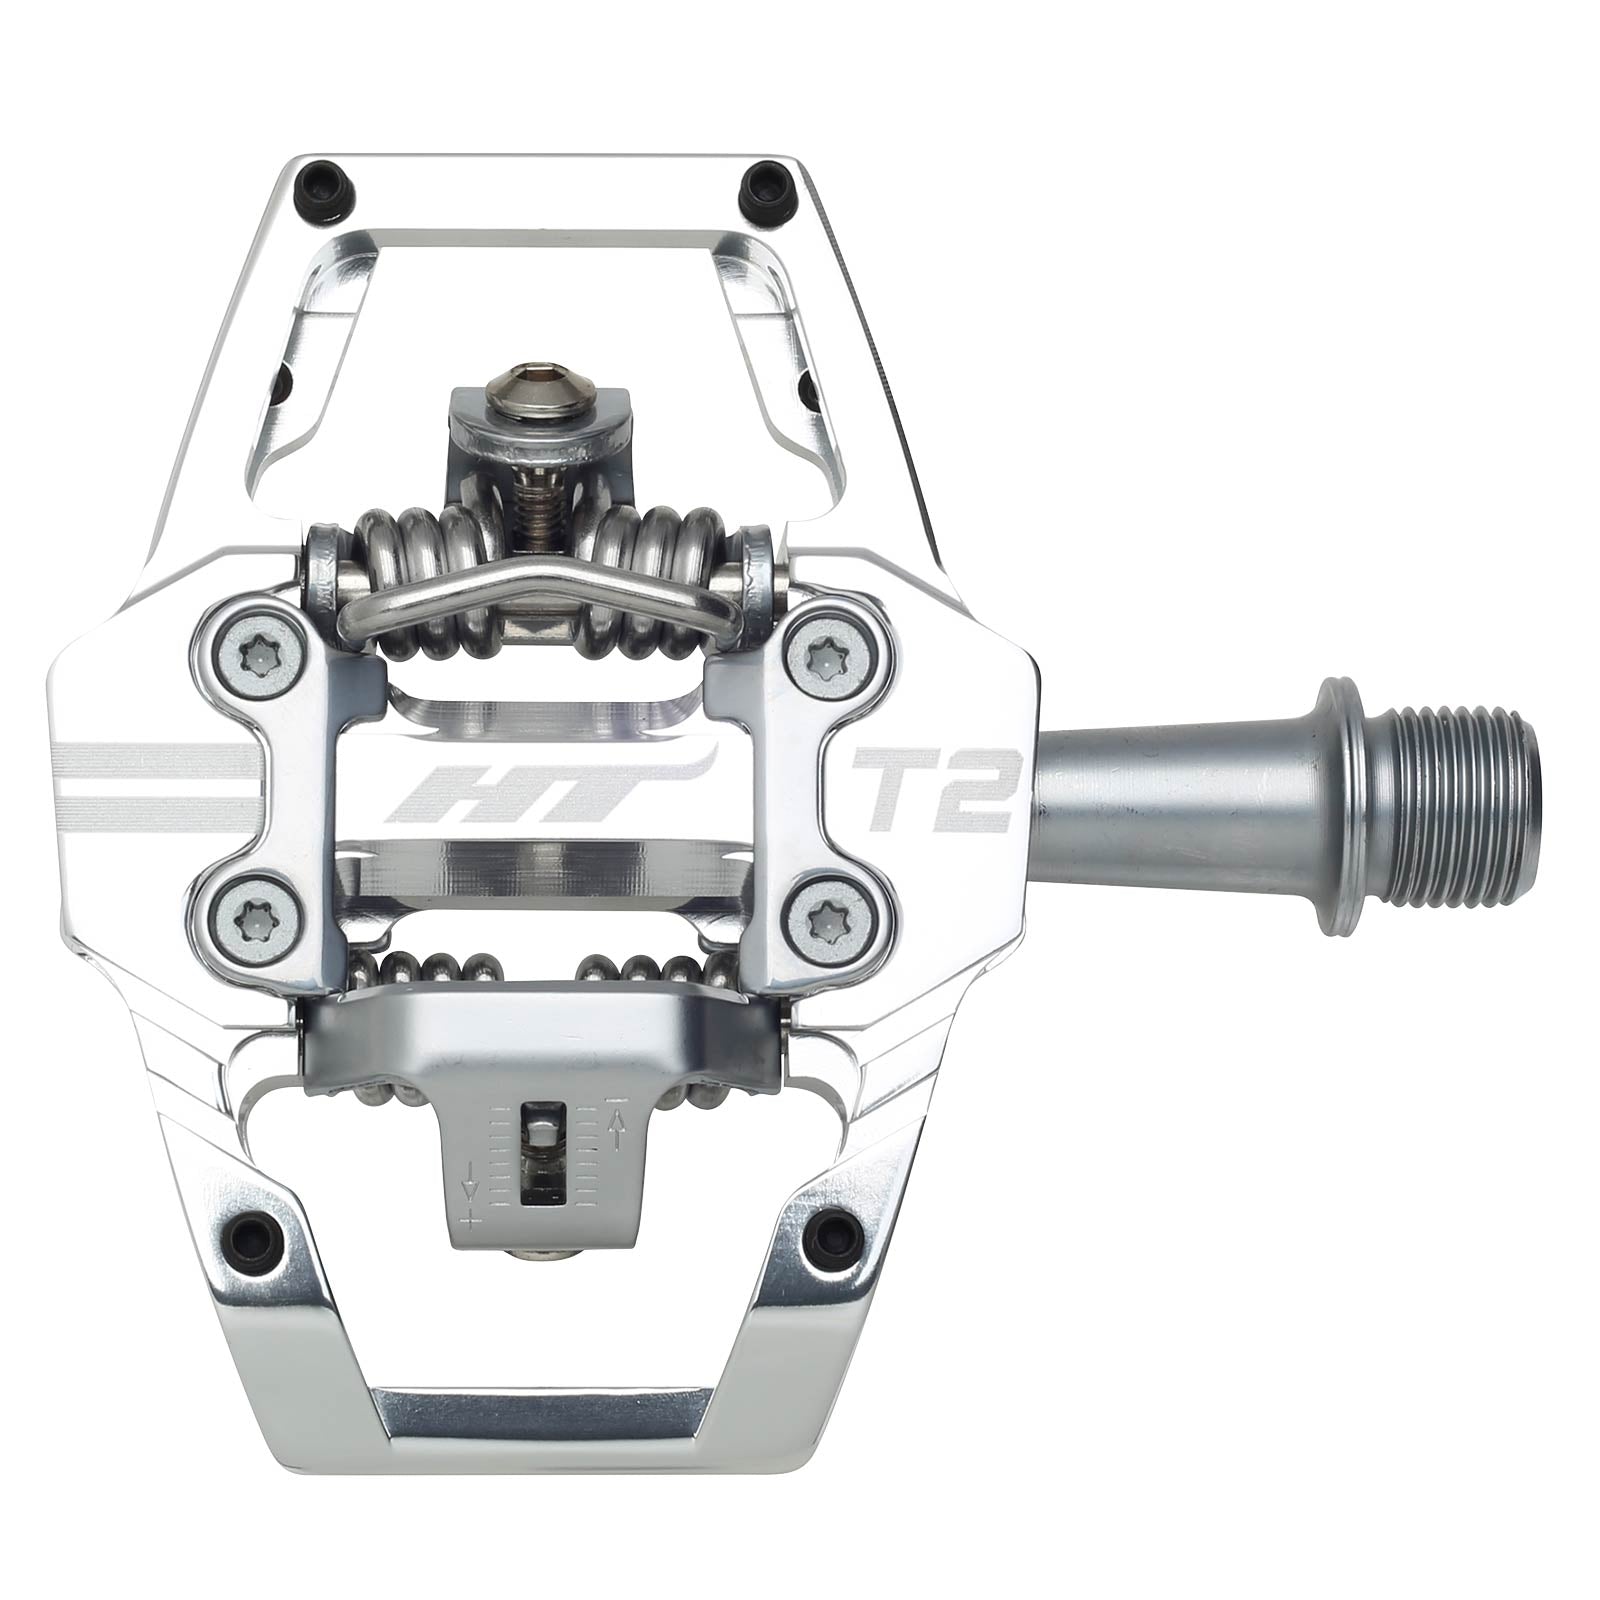 Ht T2 Pedals Alloy / CNC CRMO - Silver